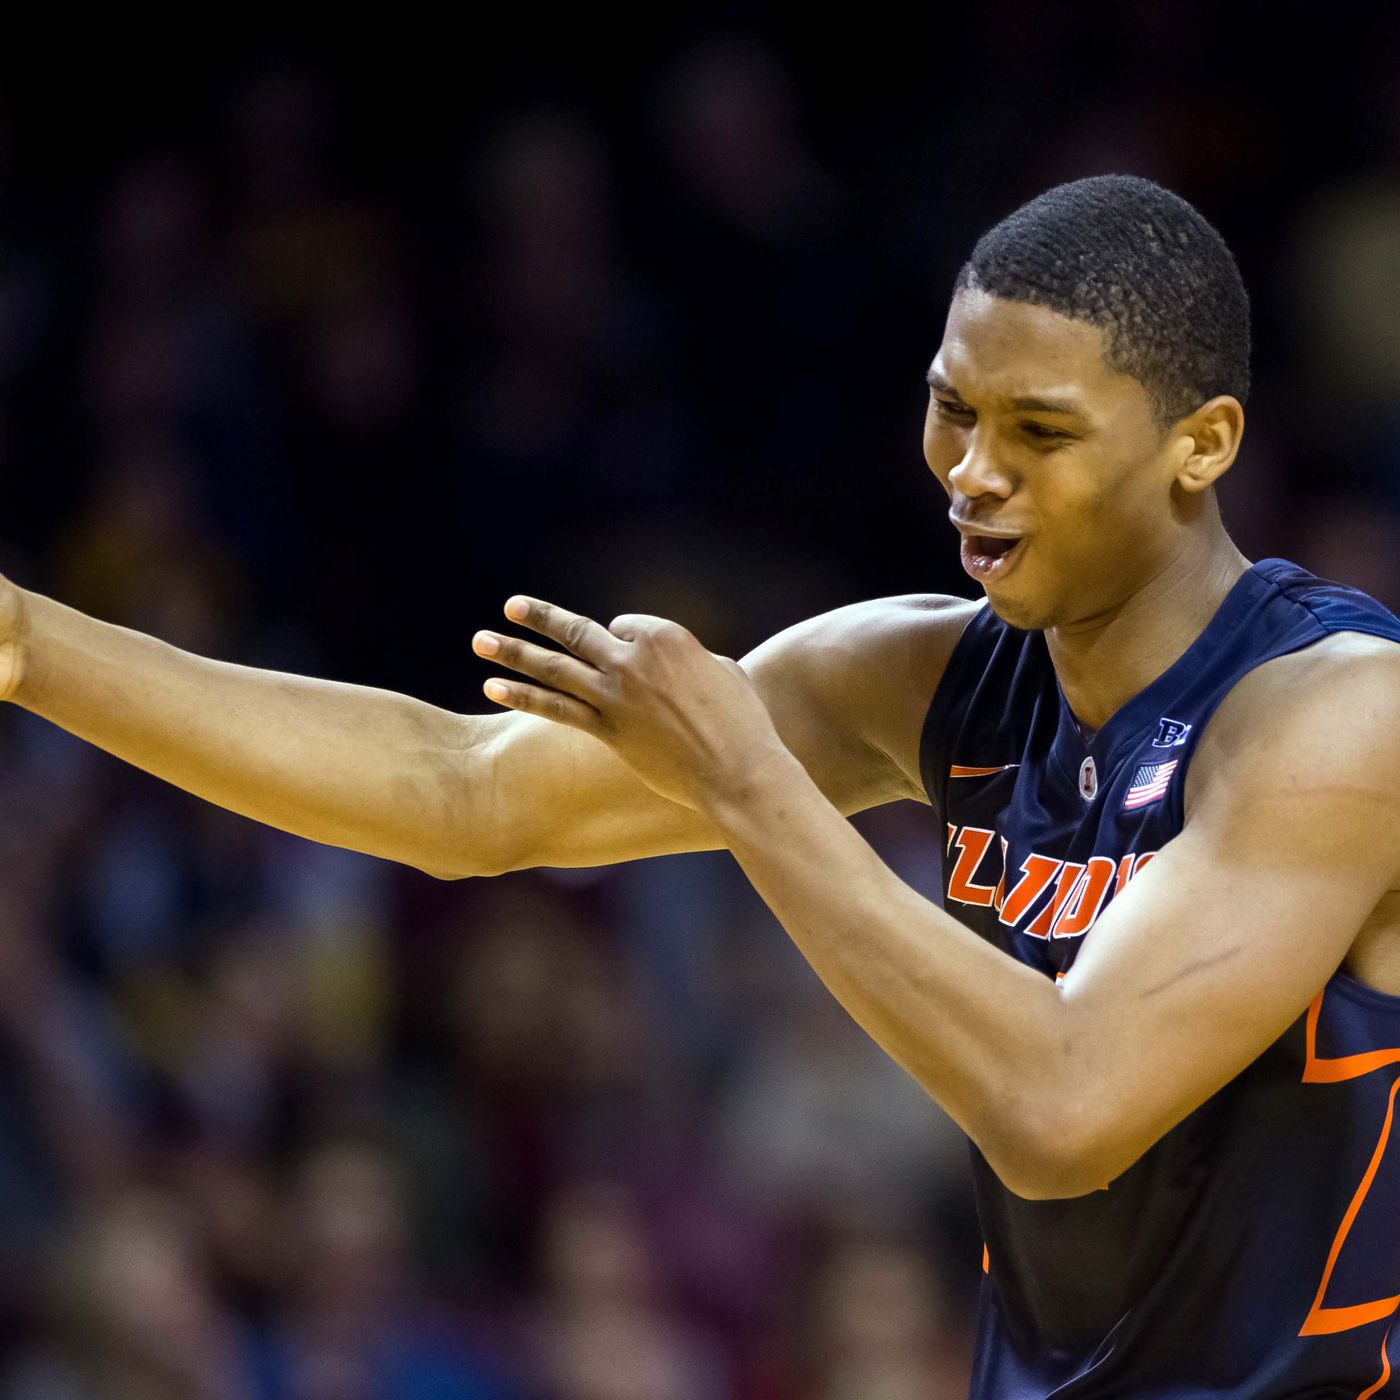 Malcolm Hill Is Poised To Rocket Up Illinois Basketball S All Time